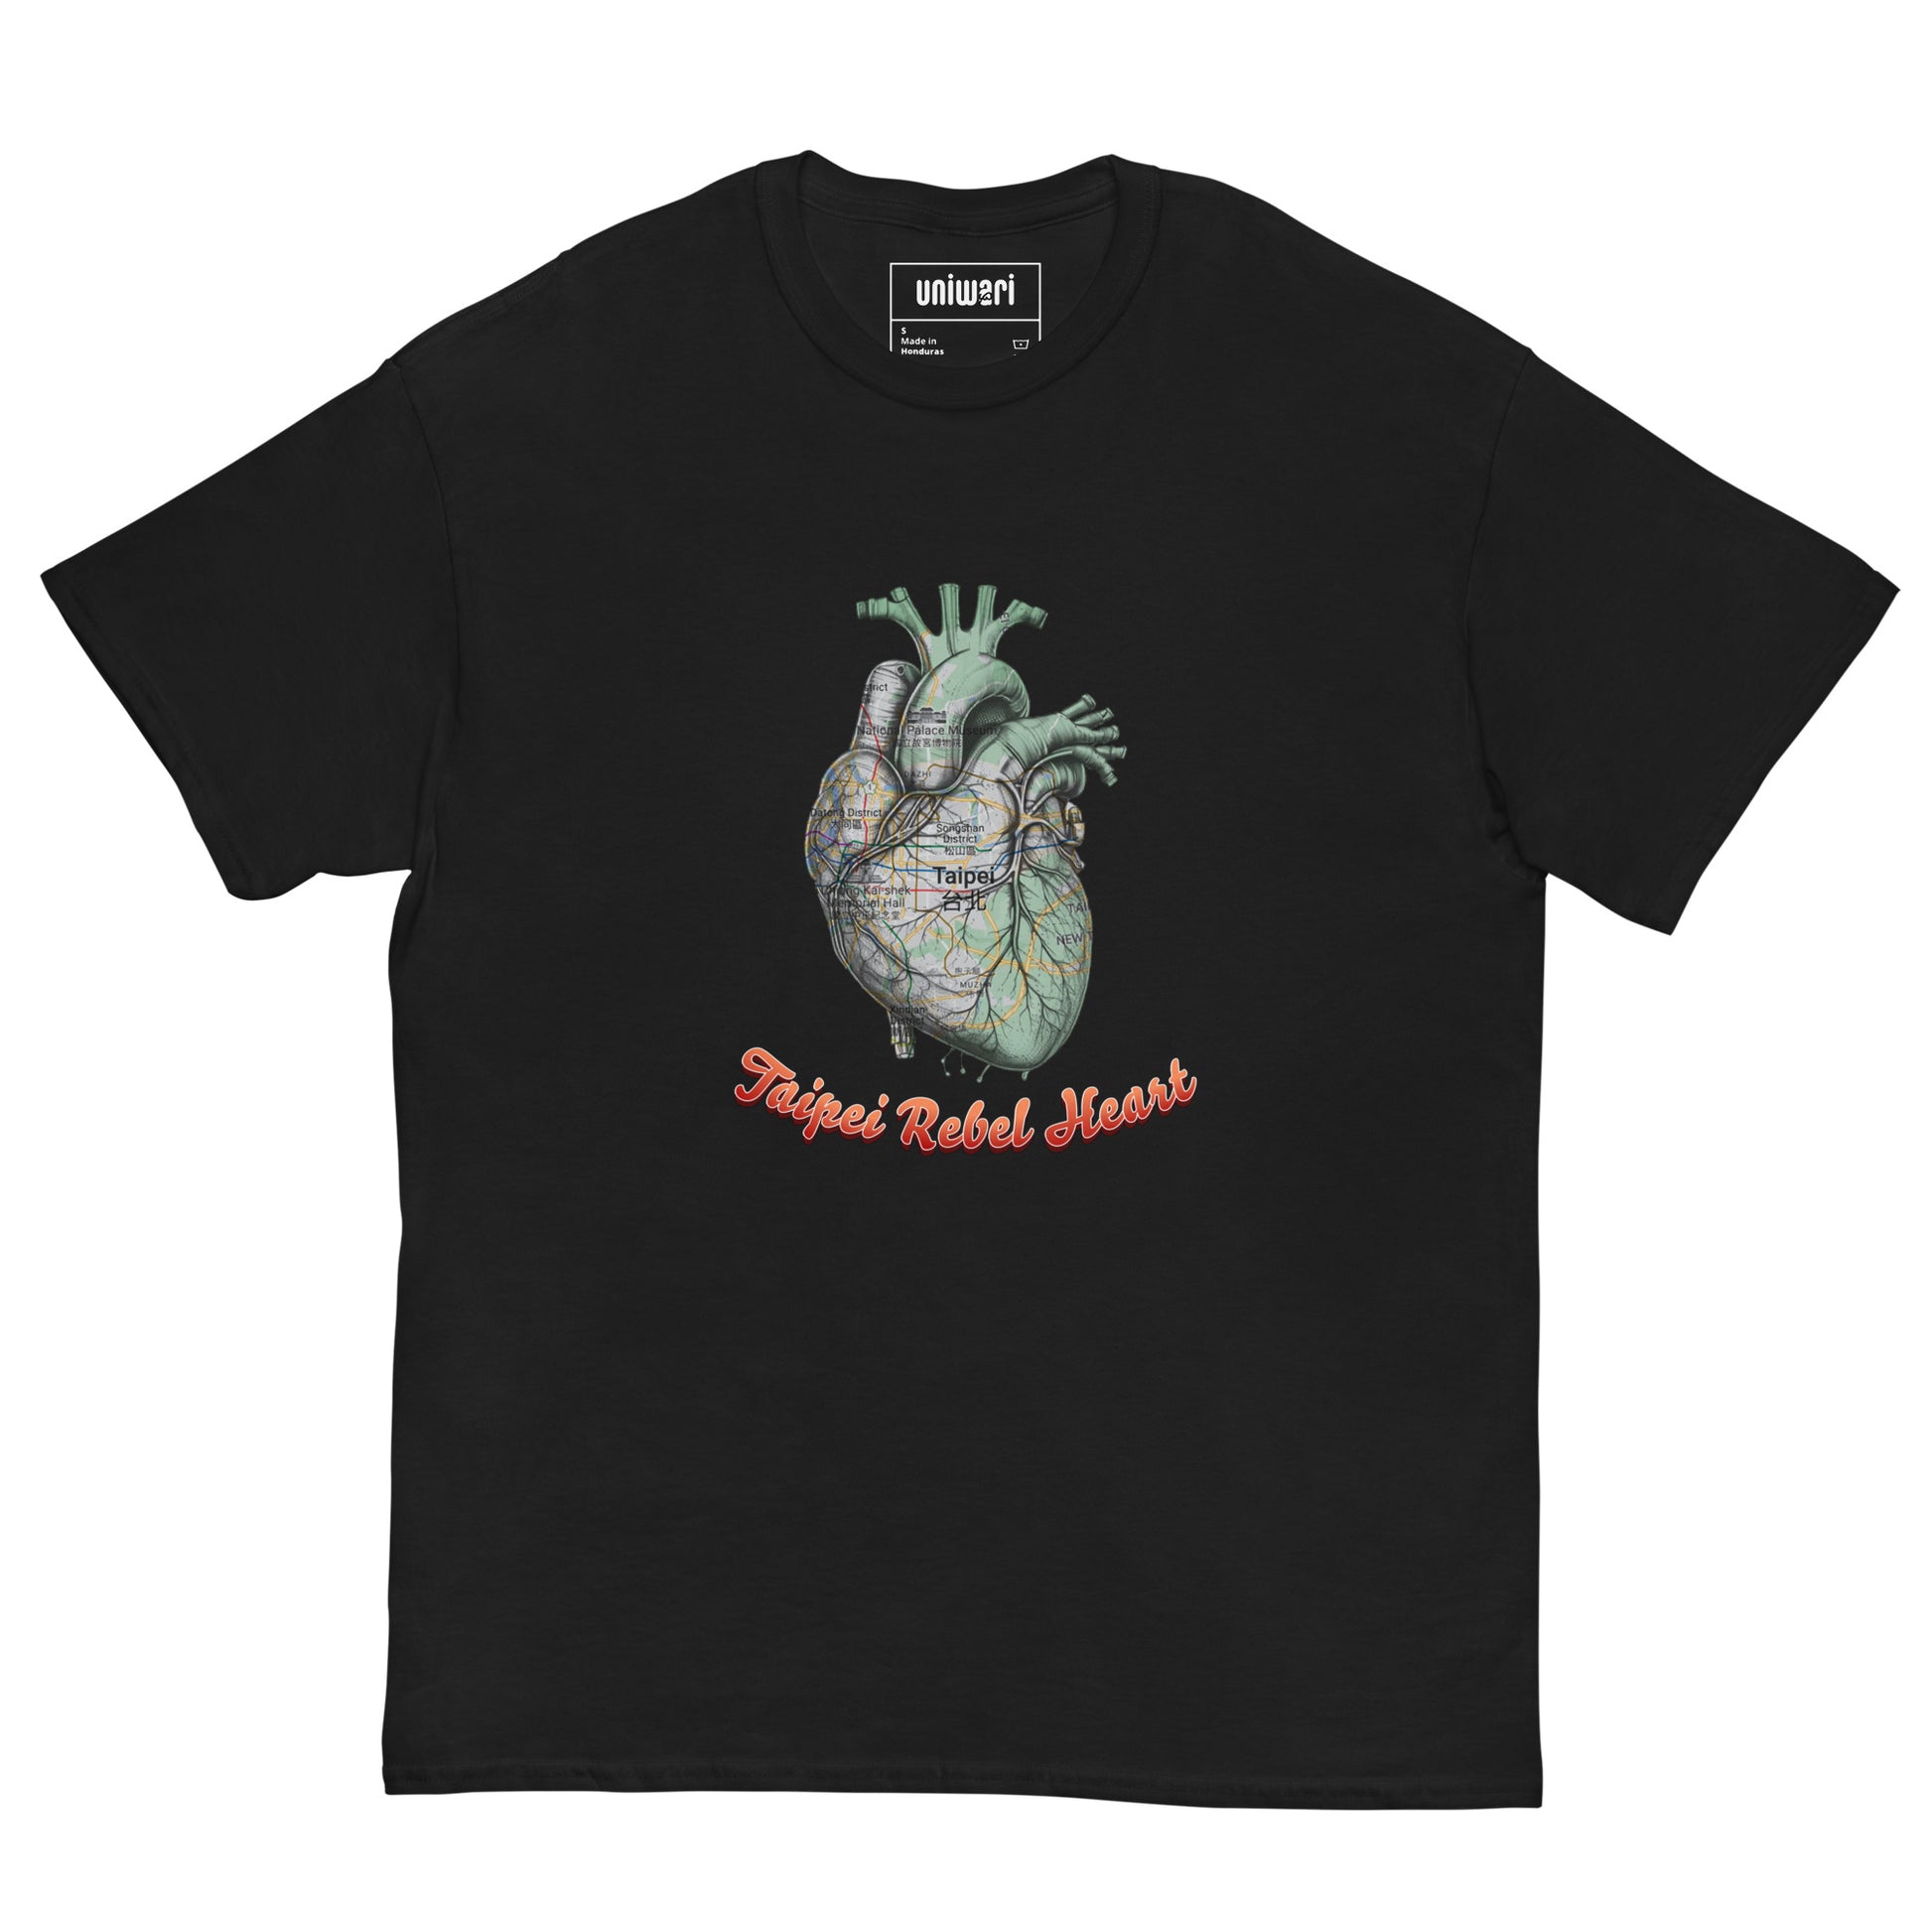 Black High Quality Tee - Front Design with a Heart Shaped Map of Taipei and a Phrase "Taipei Rebel Heart" print